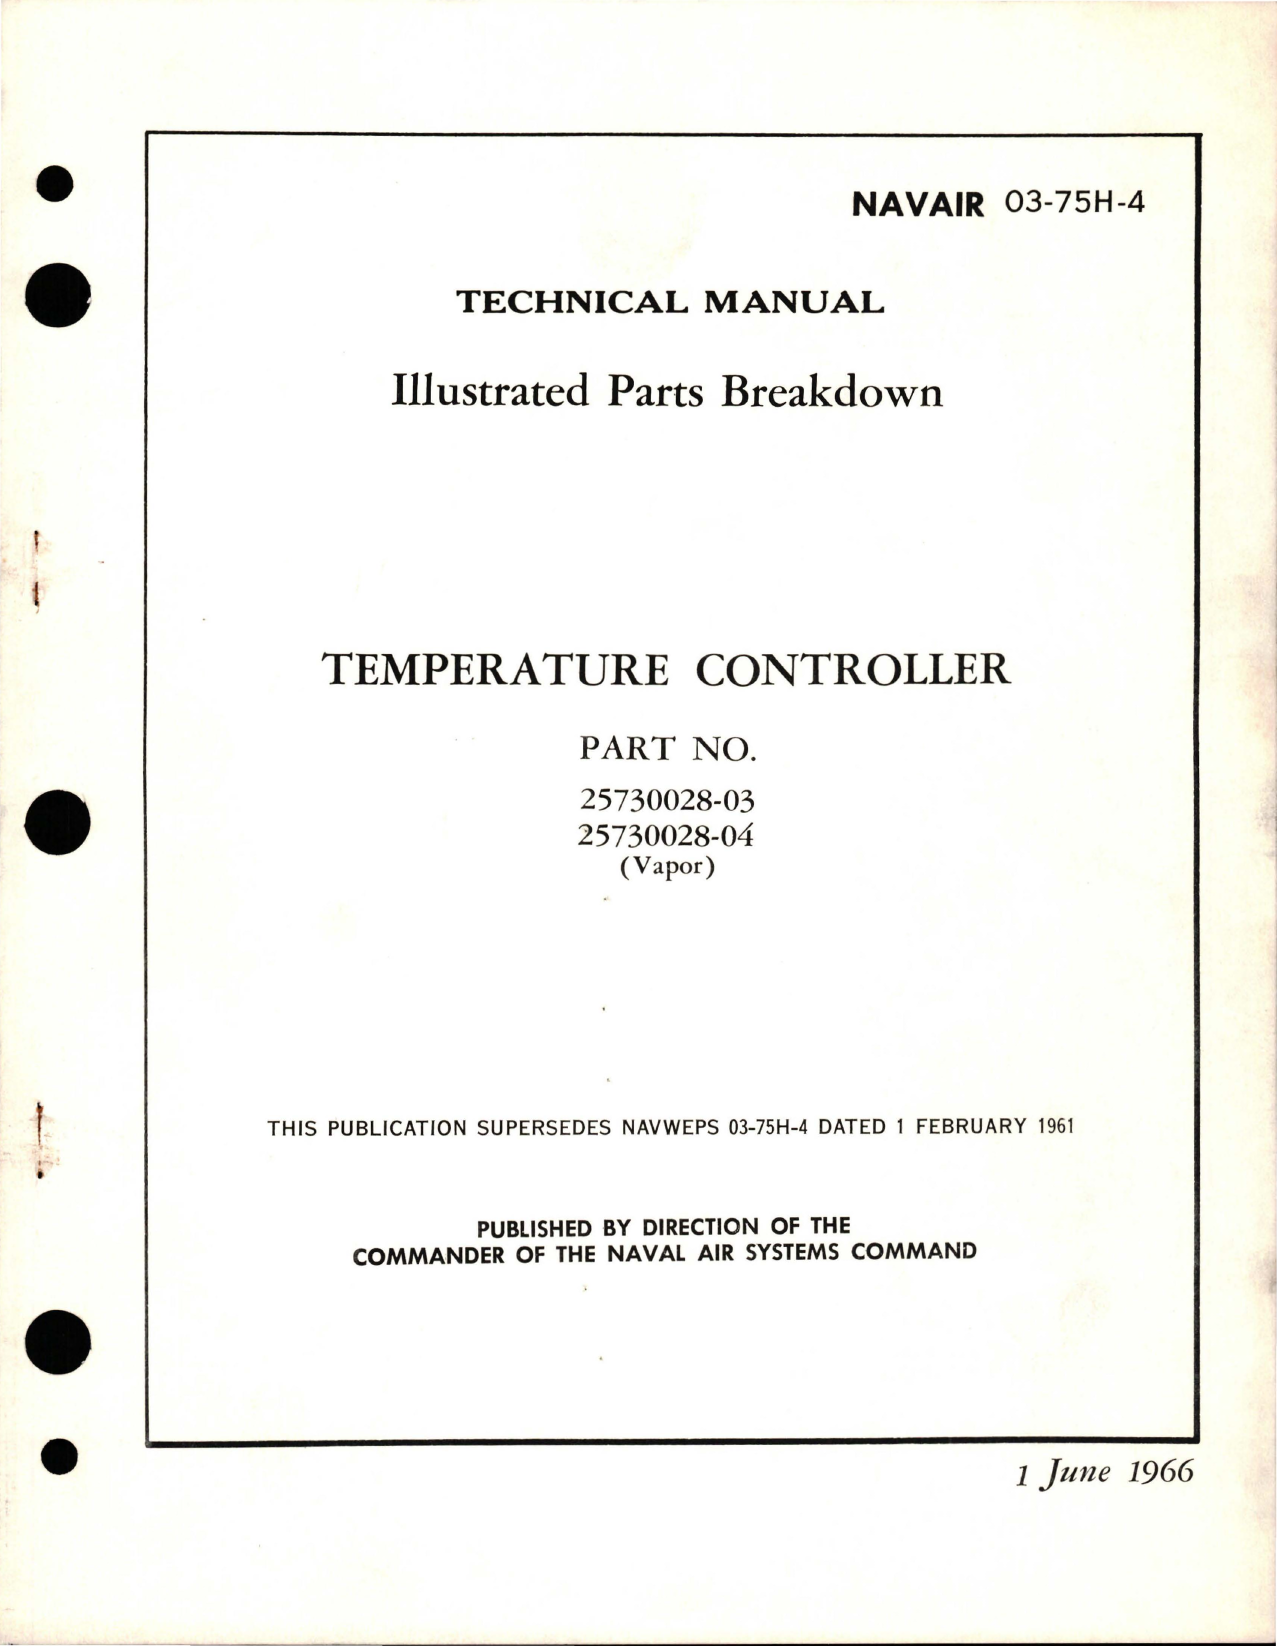 Sample page 1 from AirCorps Library document: Illustrated Parts Breakdown for Temperature Controller - Parts 25730028-03 and 25730028-04